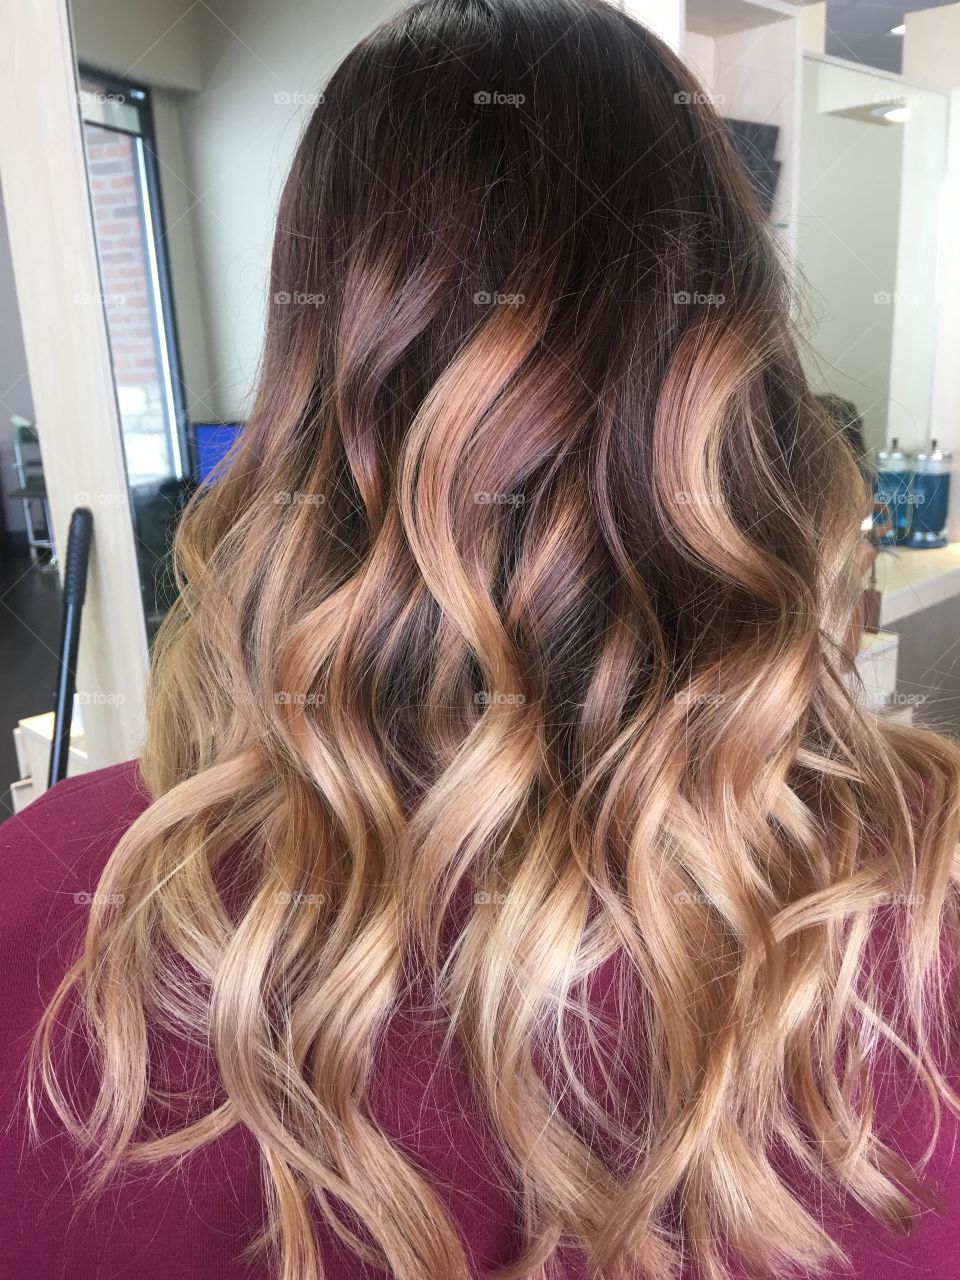 Balayage Ombre hairstyle and color